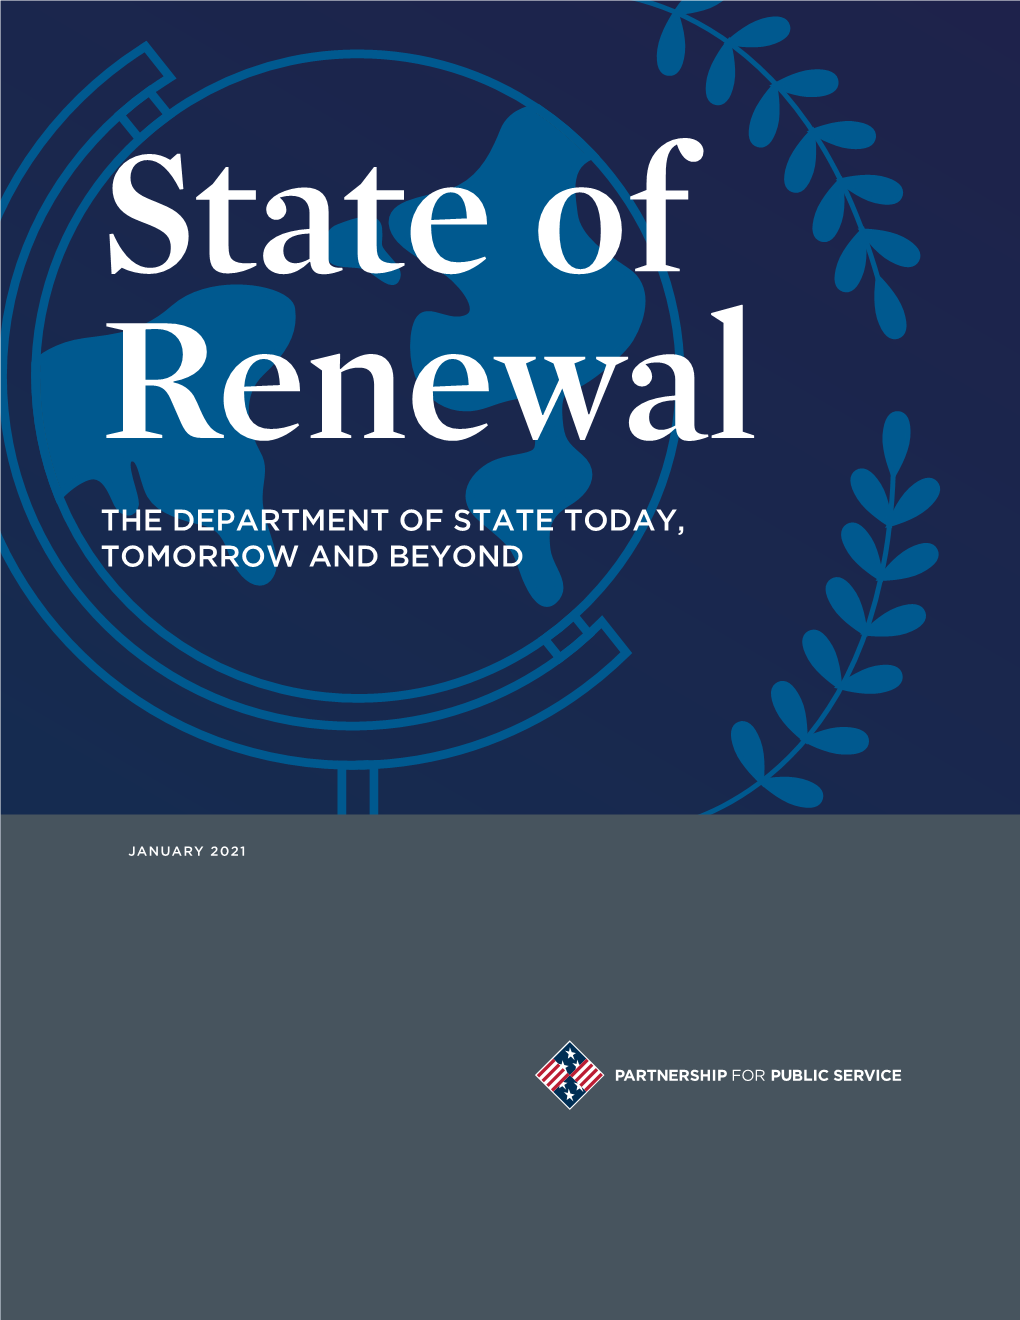 State of Renewal: the Department of State Today, Tomorrow and Beyond